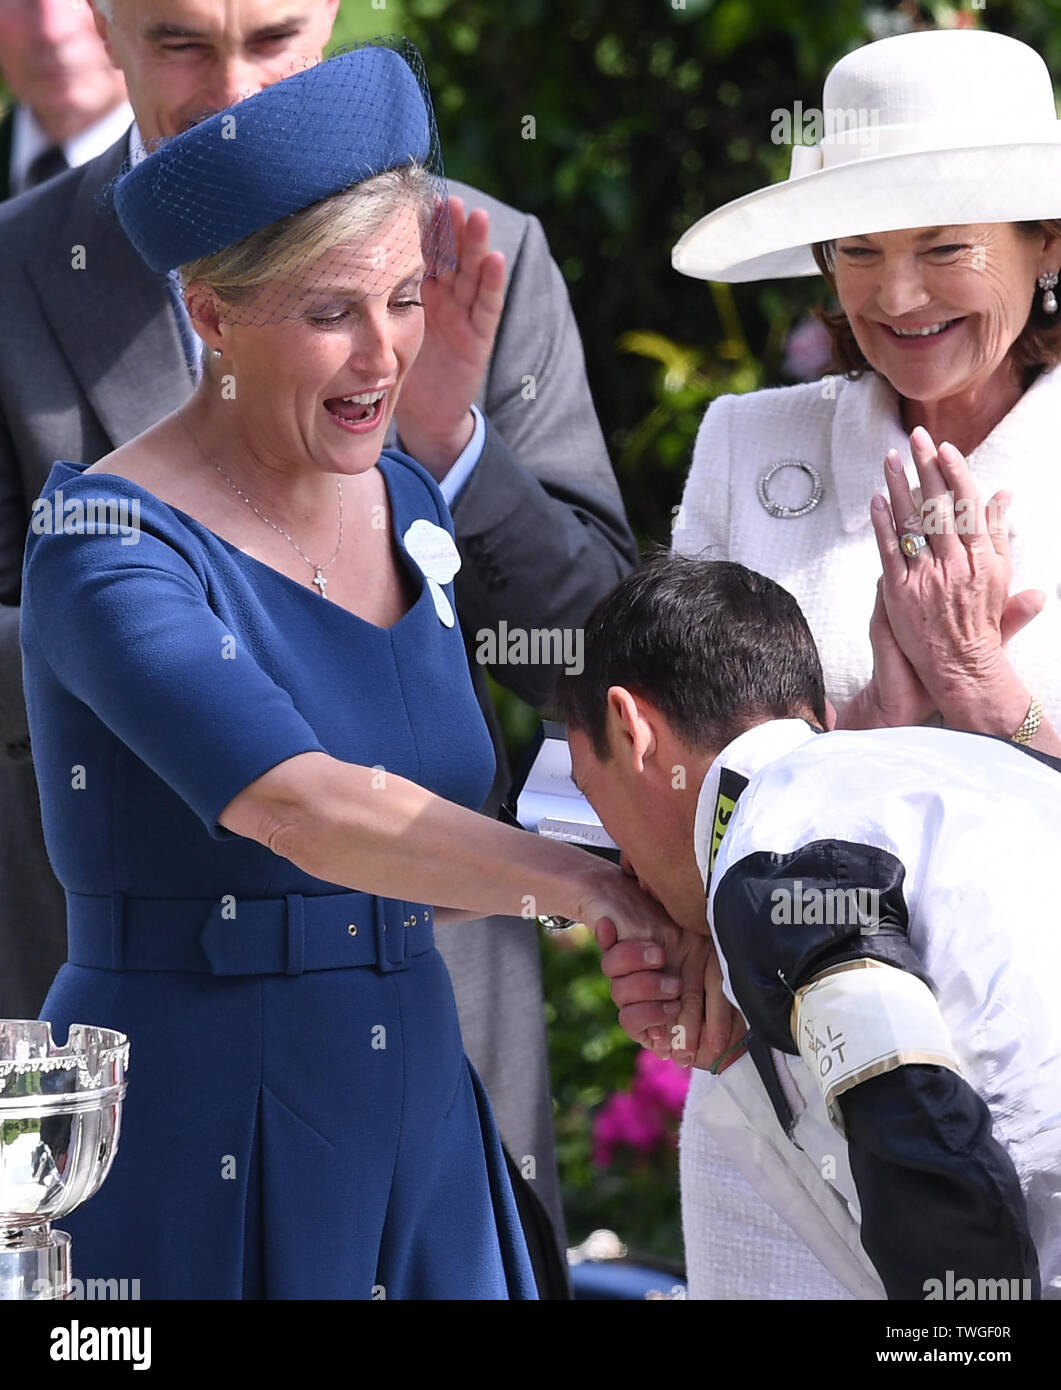 ascot-racecourse-ascot-uk-20th-june-2019-royal-ascot-horse-racing-race-3-ribblesdale-stakes-the-countess-of-wessex-reacts-as-frankie-dettori-kisses-her-hand-before-she-presents-him-with-the-winning-jockeys-trophy-credit-action-plus-sportsalamy-live-news-TWGF0R.jpg